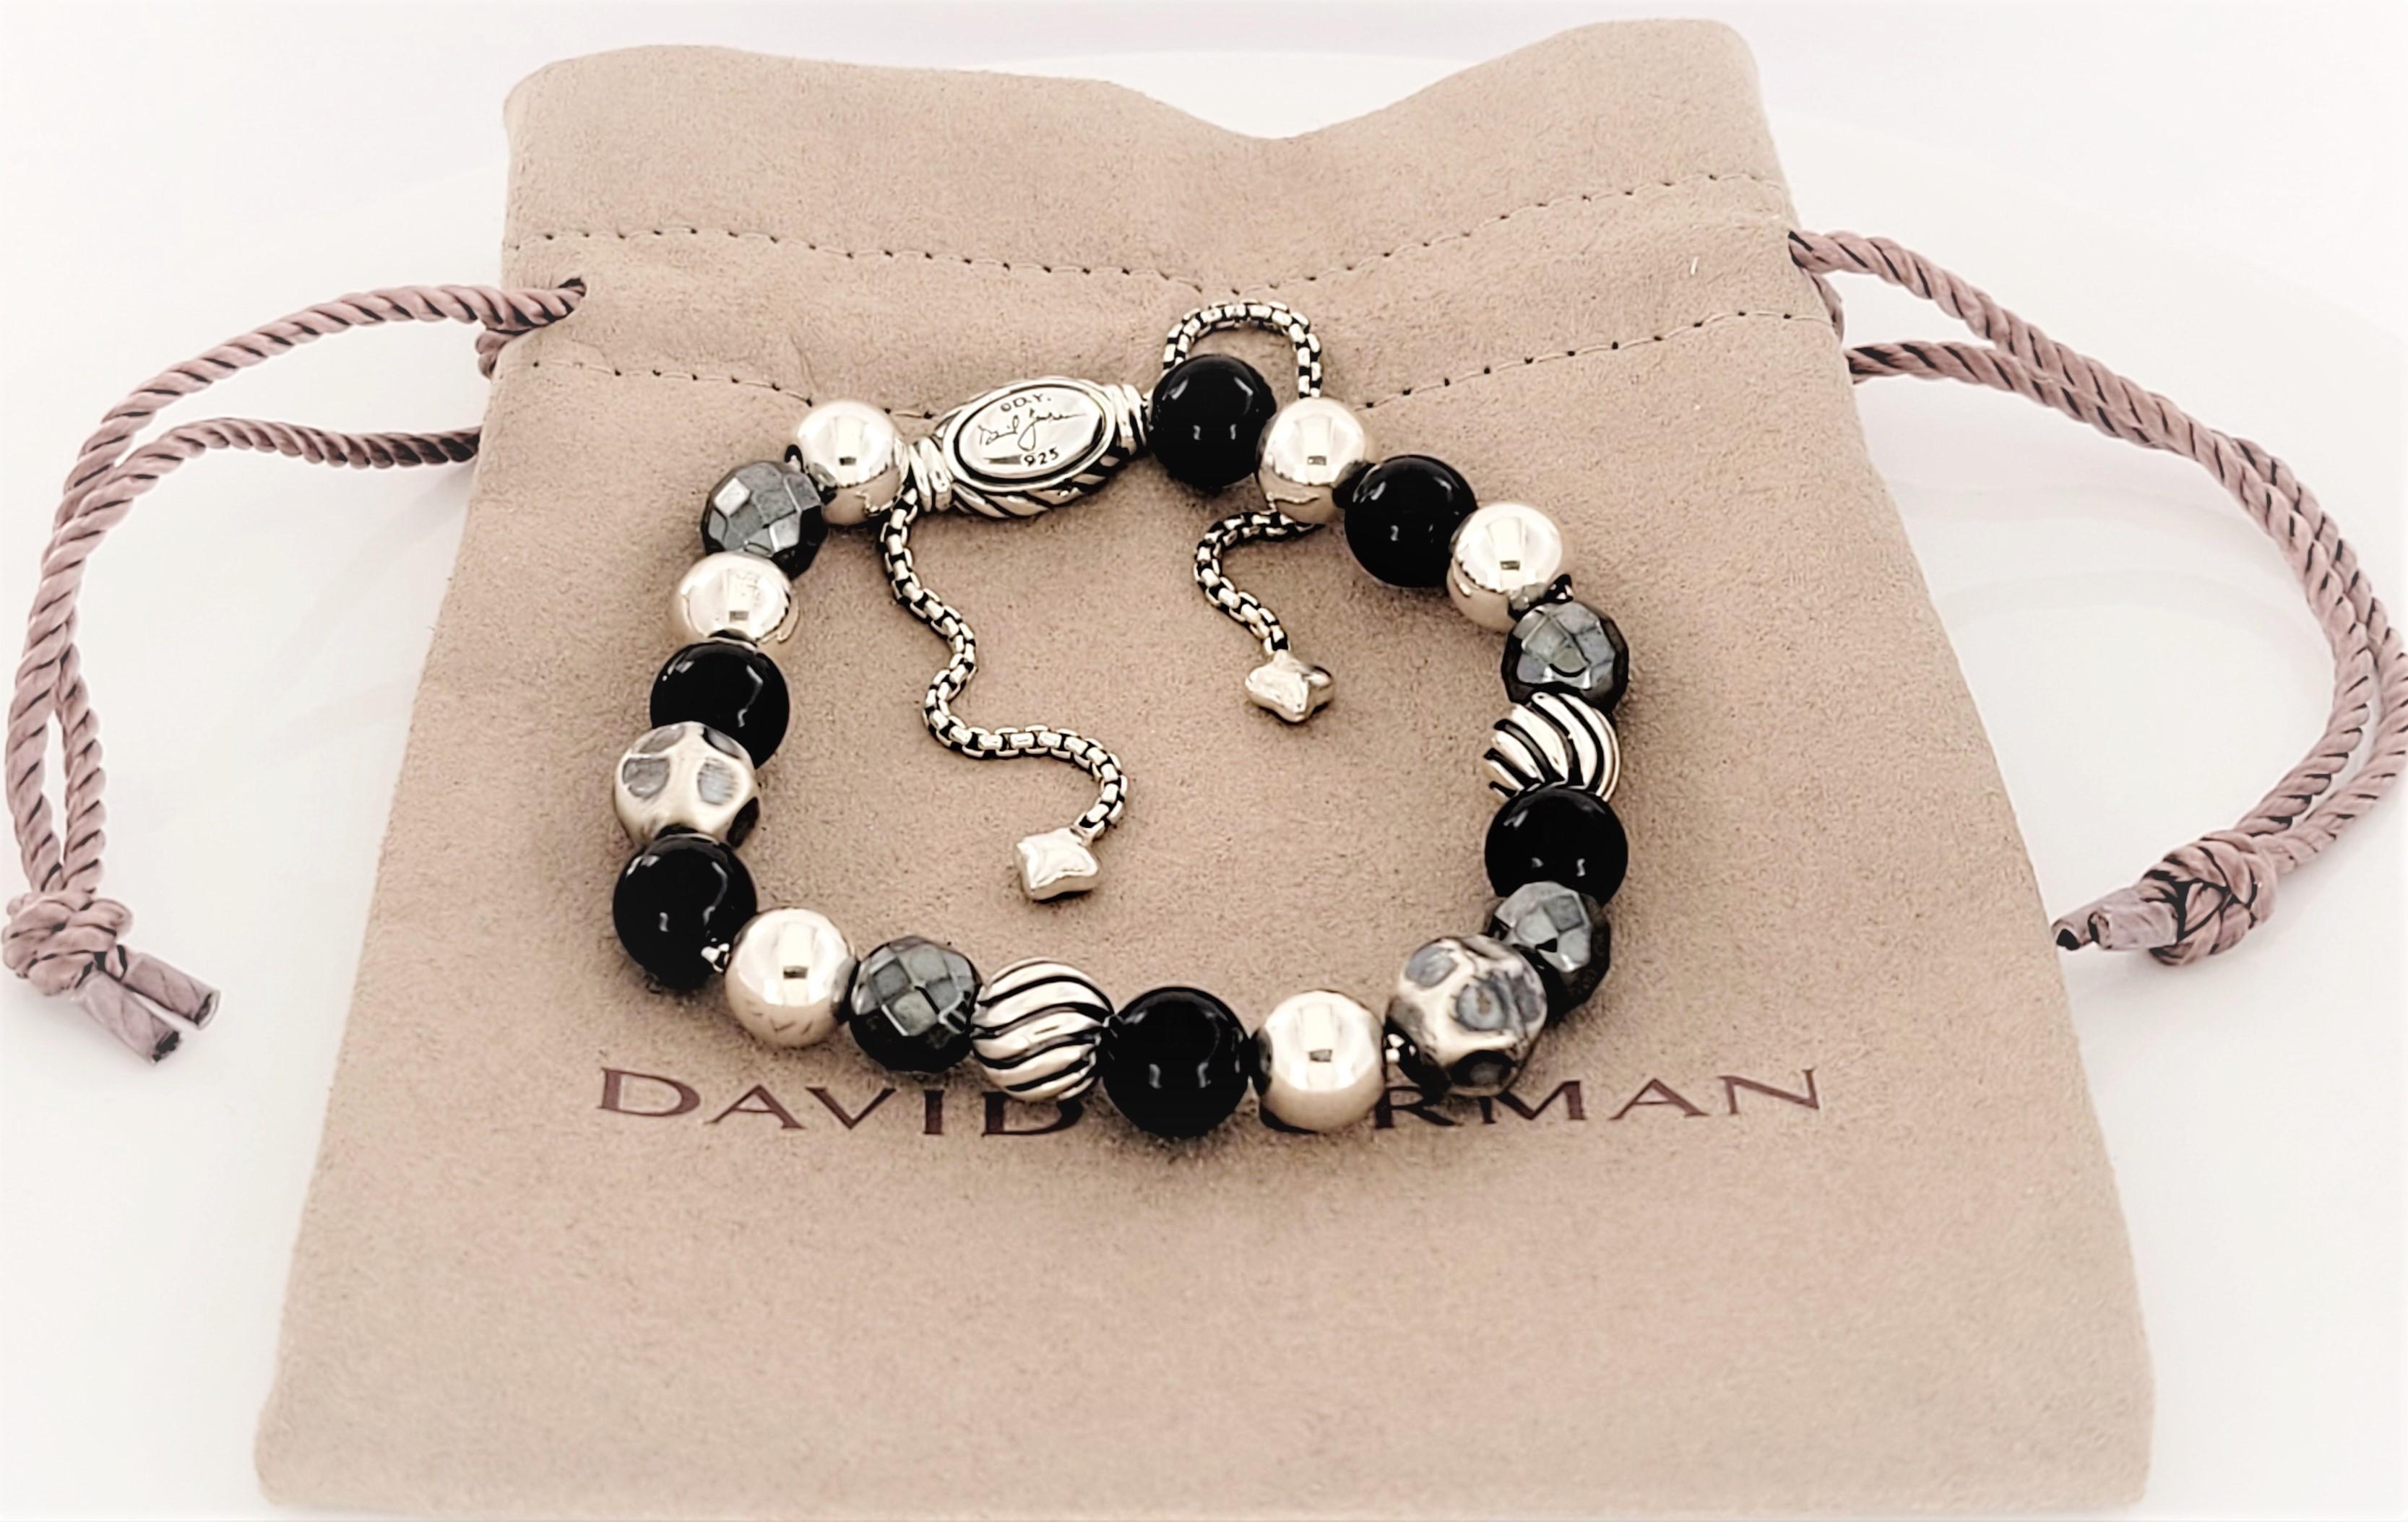 Brand David Yurman 
Beaded bracelet 8mm
Material Sterling Silver  
Bracelet adjustable 
Condition New
Weight 22.7gr 
Retail Price:$695
Comes with David Yurman pouch